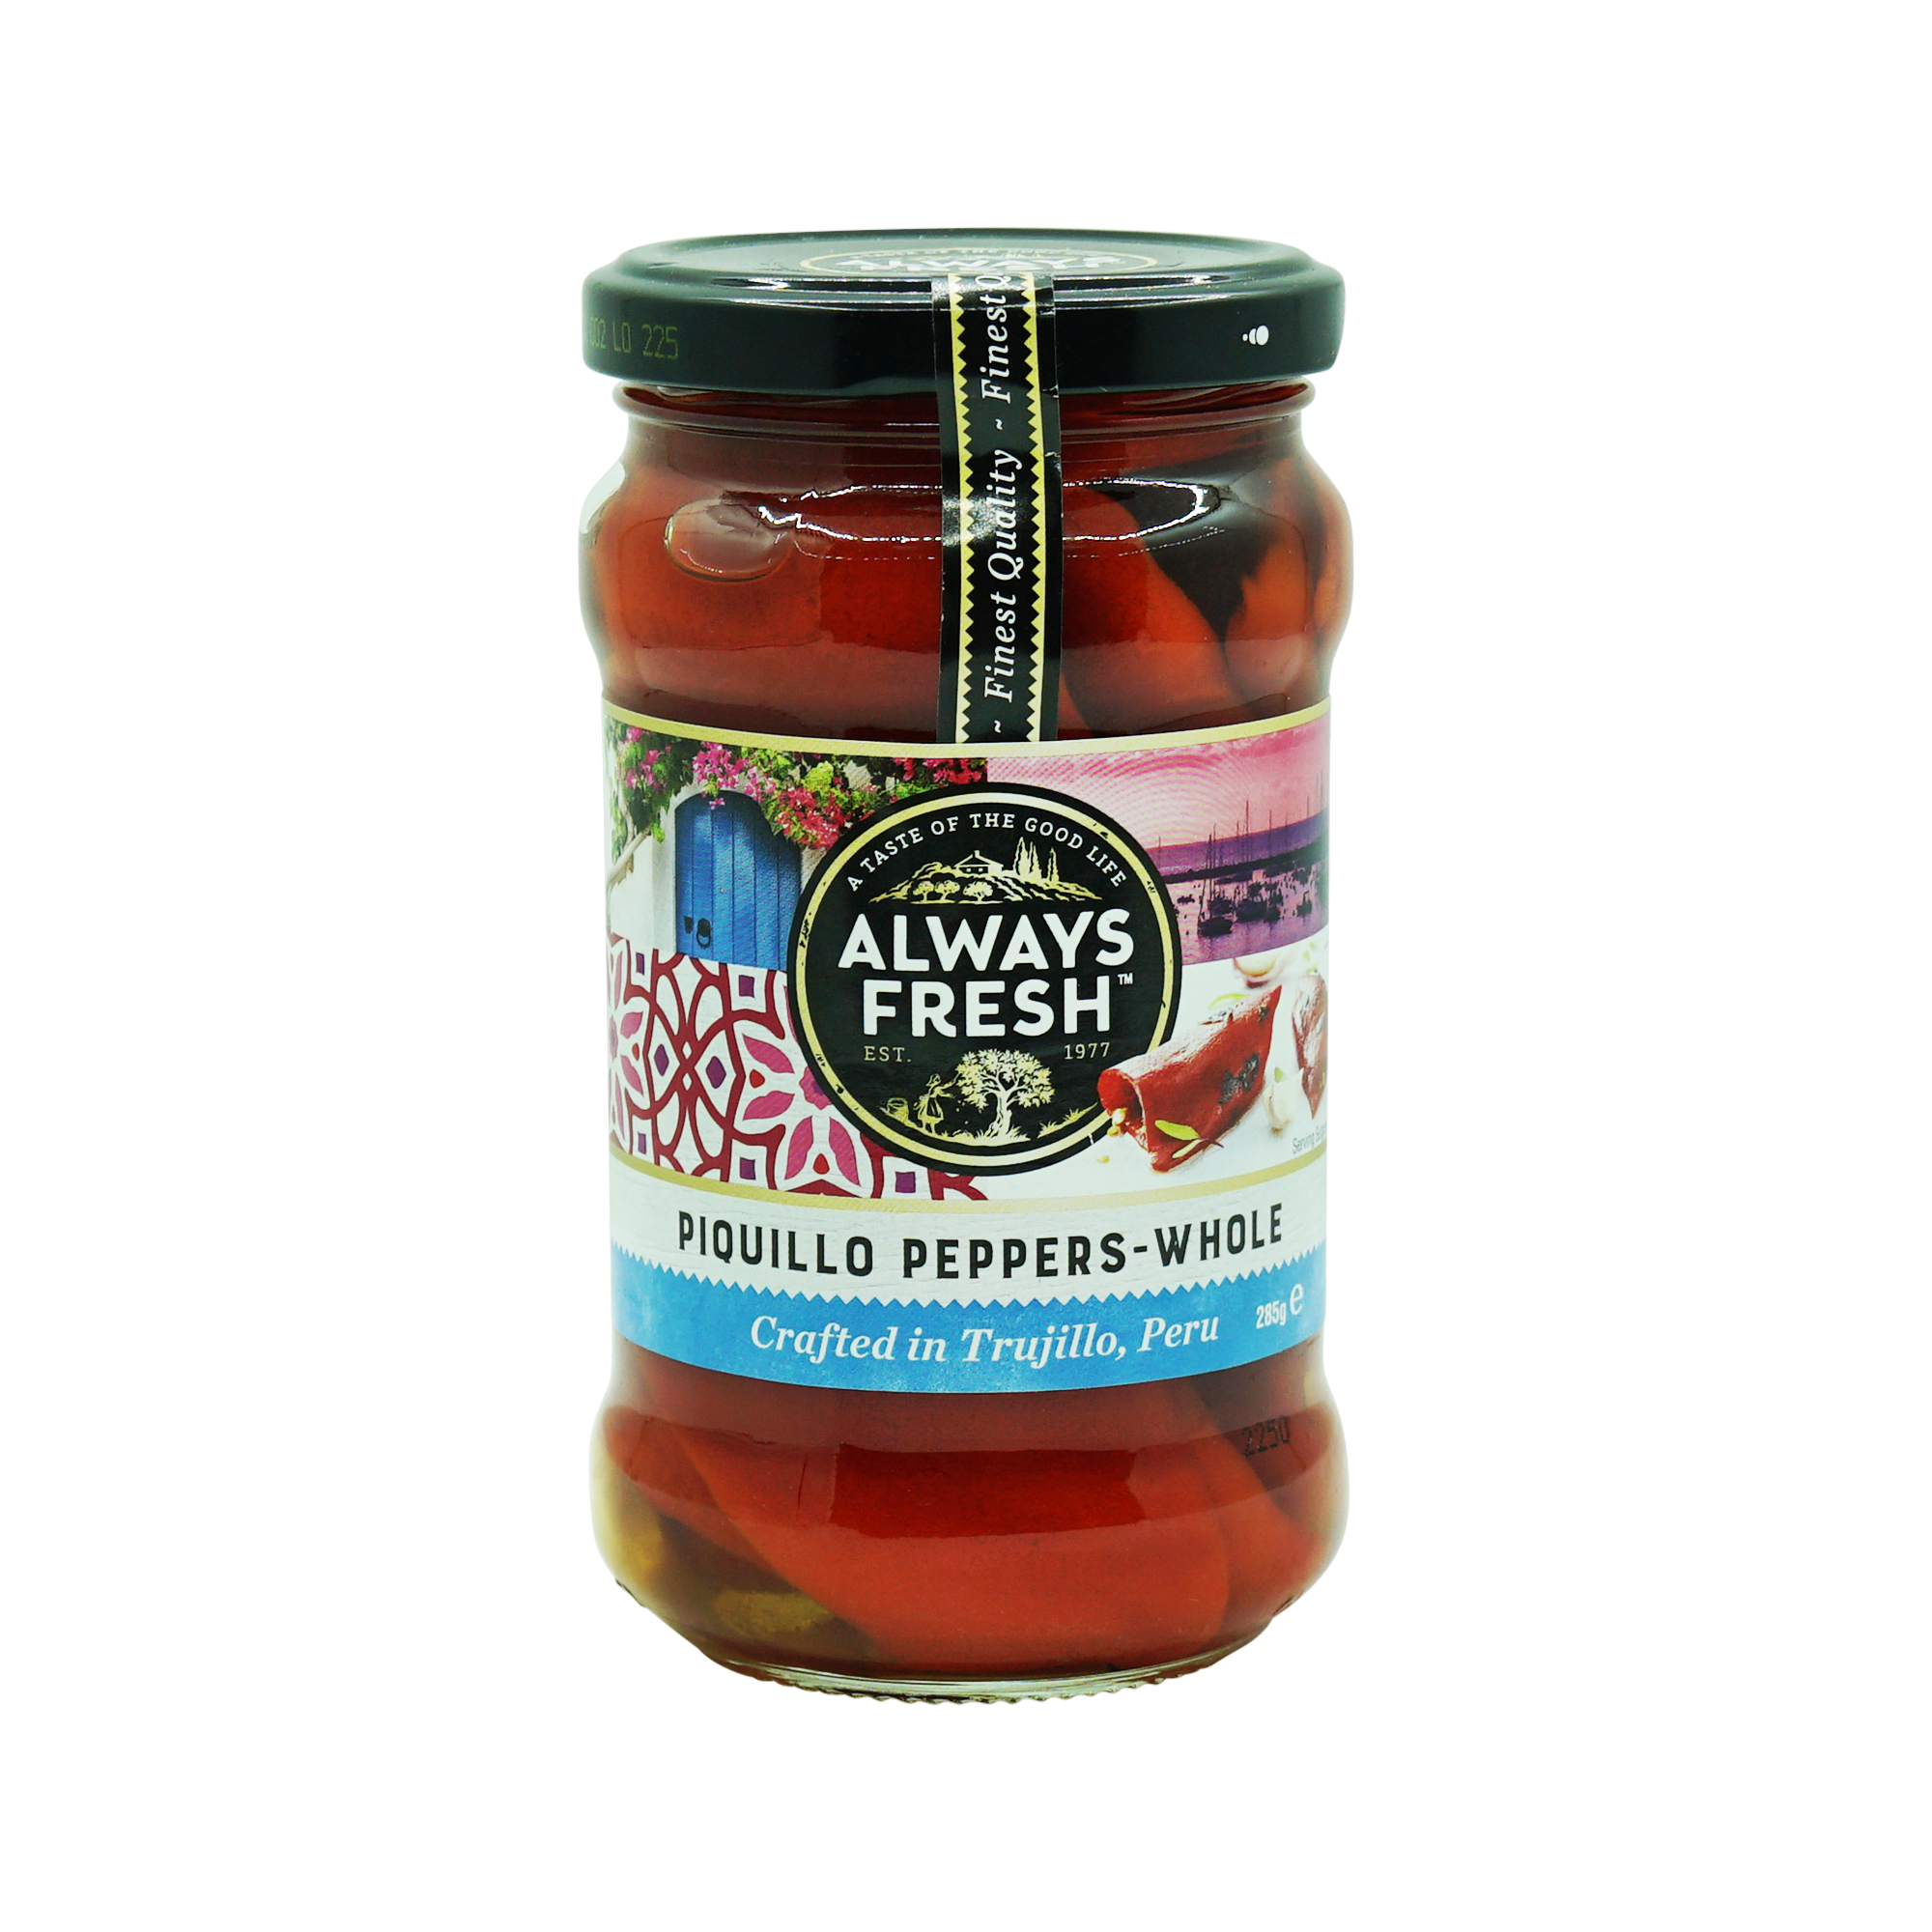 Always Fresh Peppers Piquillo Whole (285g)